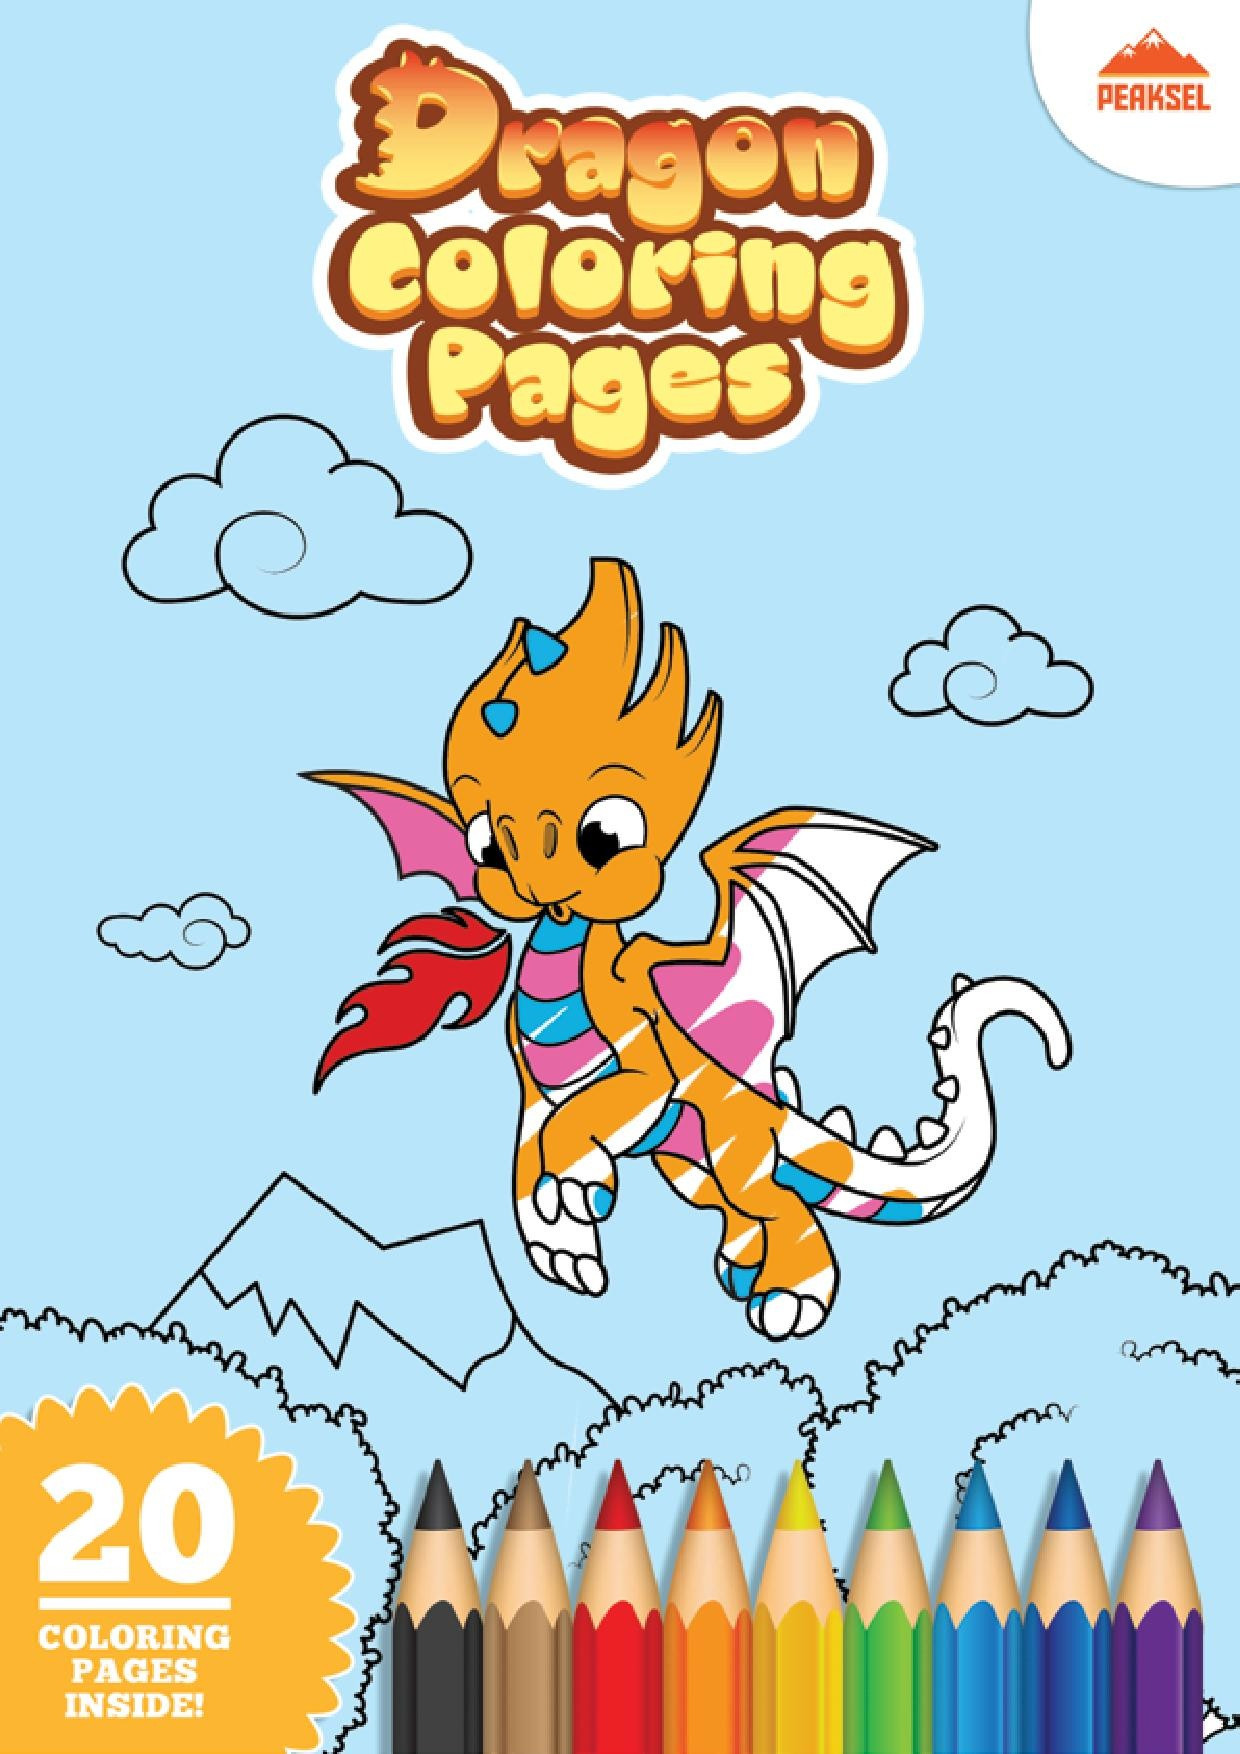 Printable Coloring Pages For Kids.Pdf
 File Dragon Coloring Pages Printable Coloring Book for